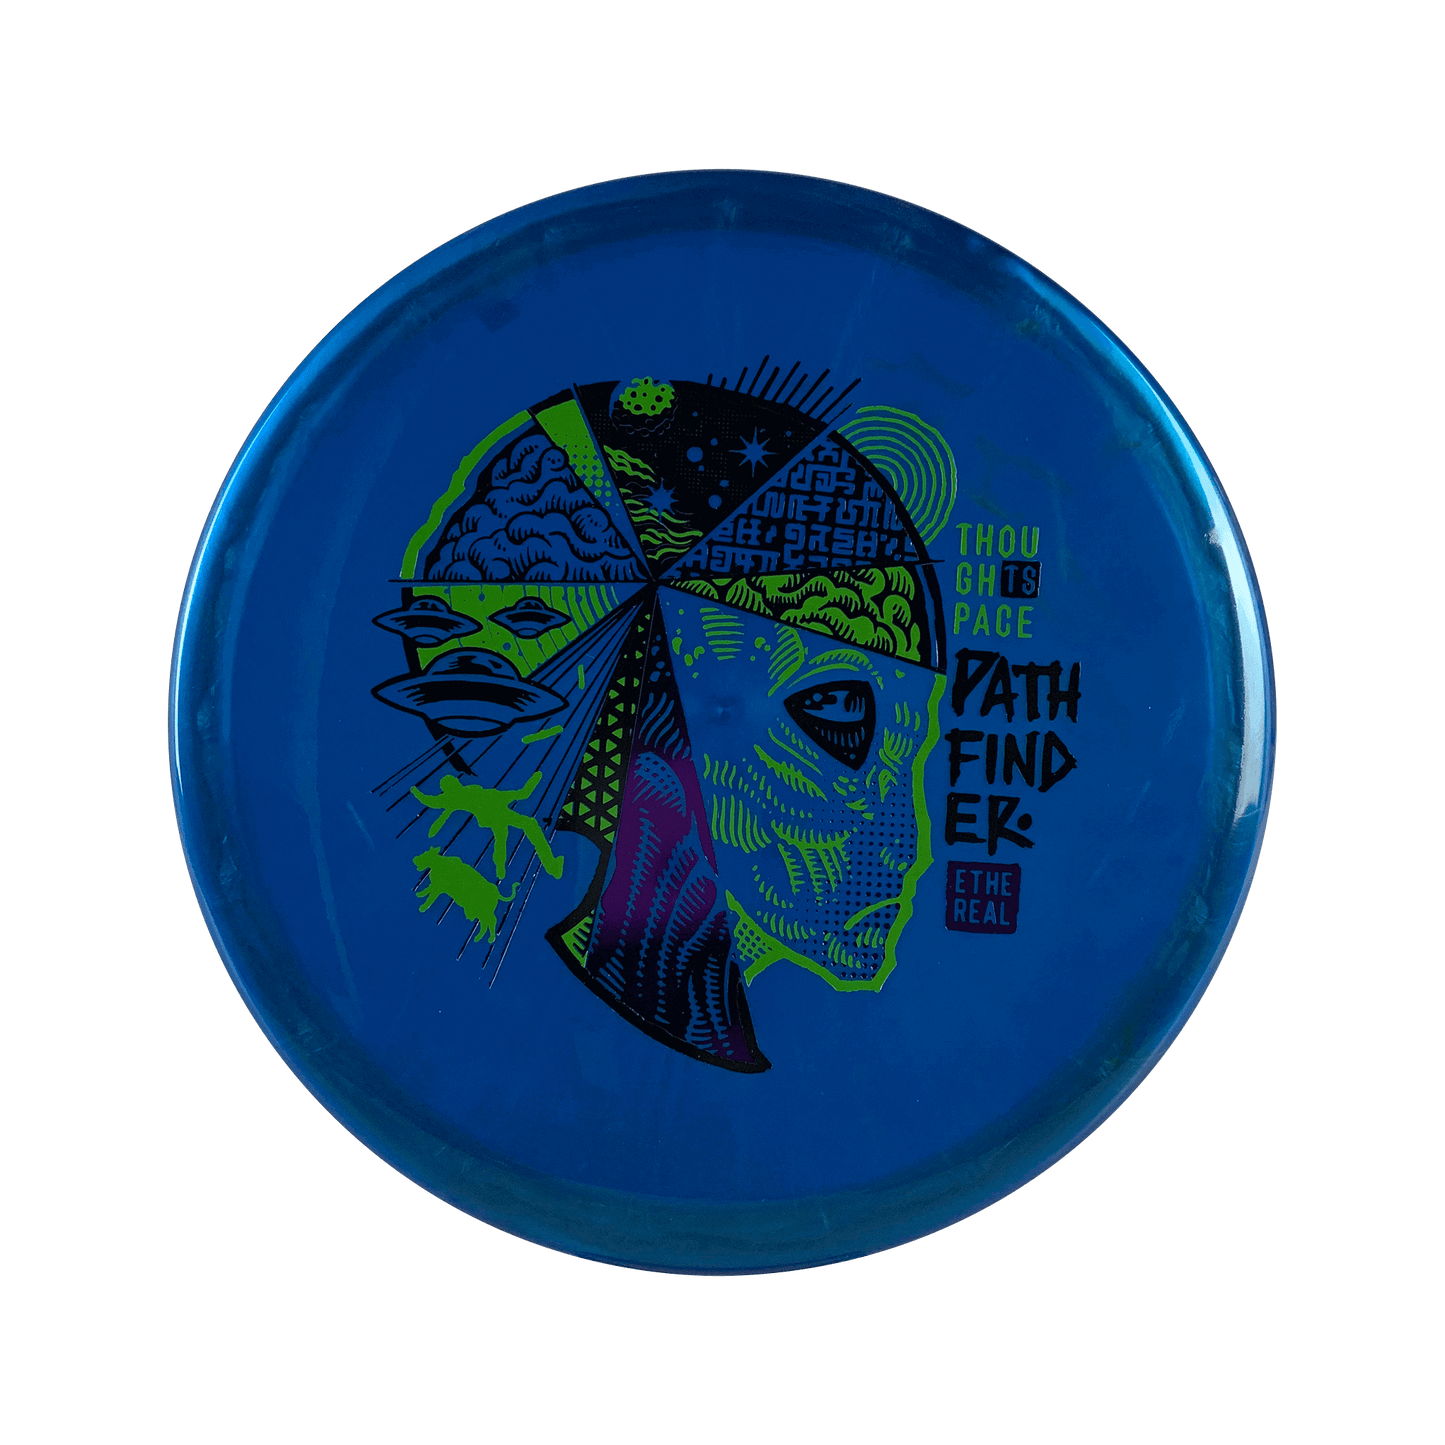 Ethereal Pathfinder Disc Thought Space Athletics blue 177 